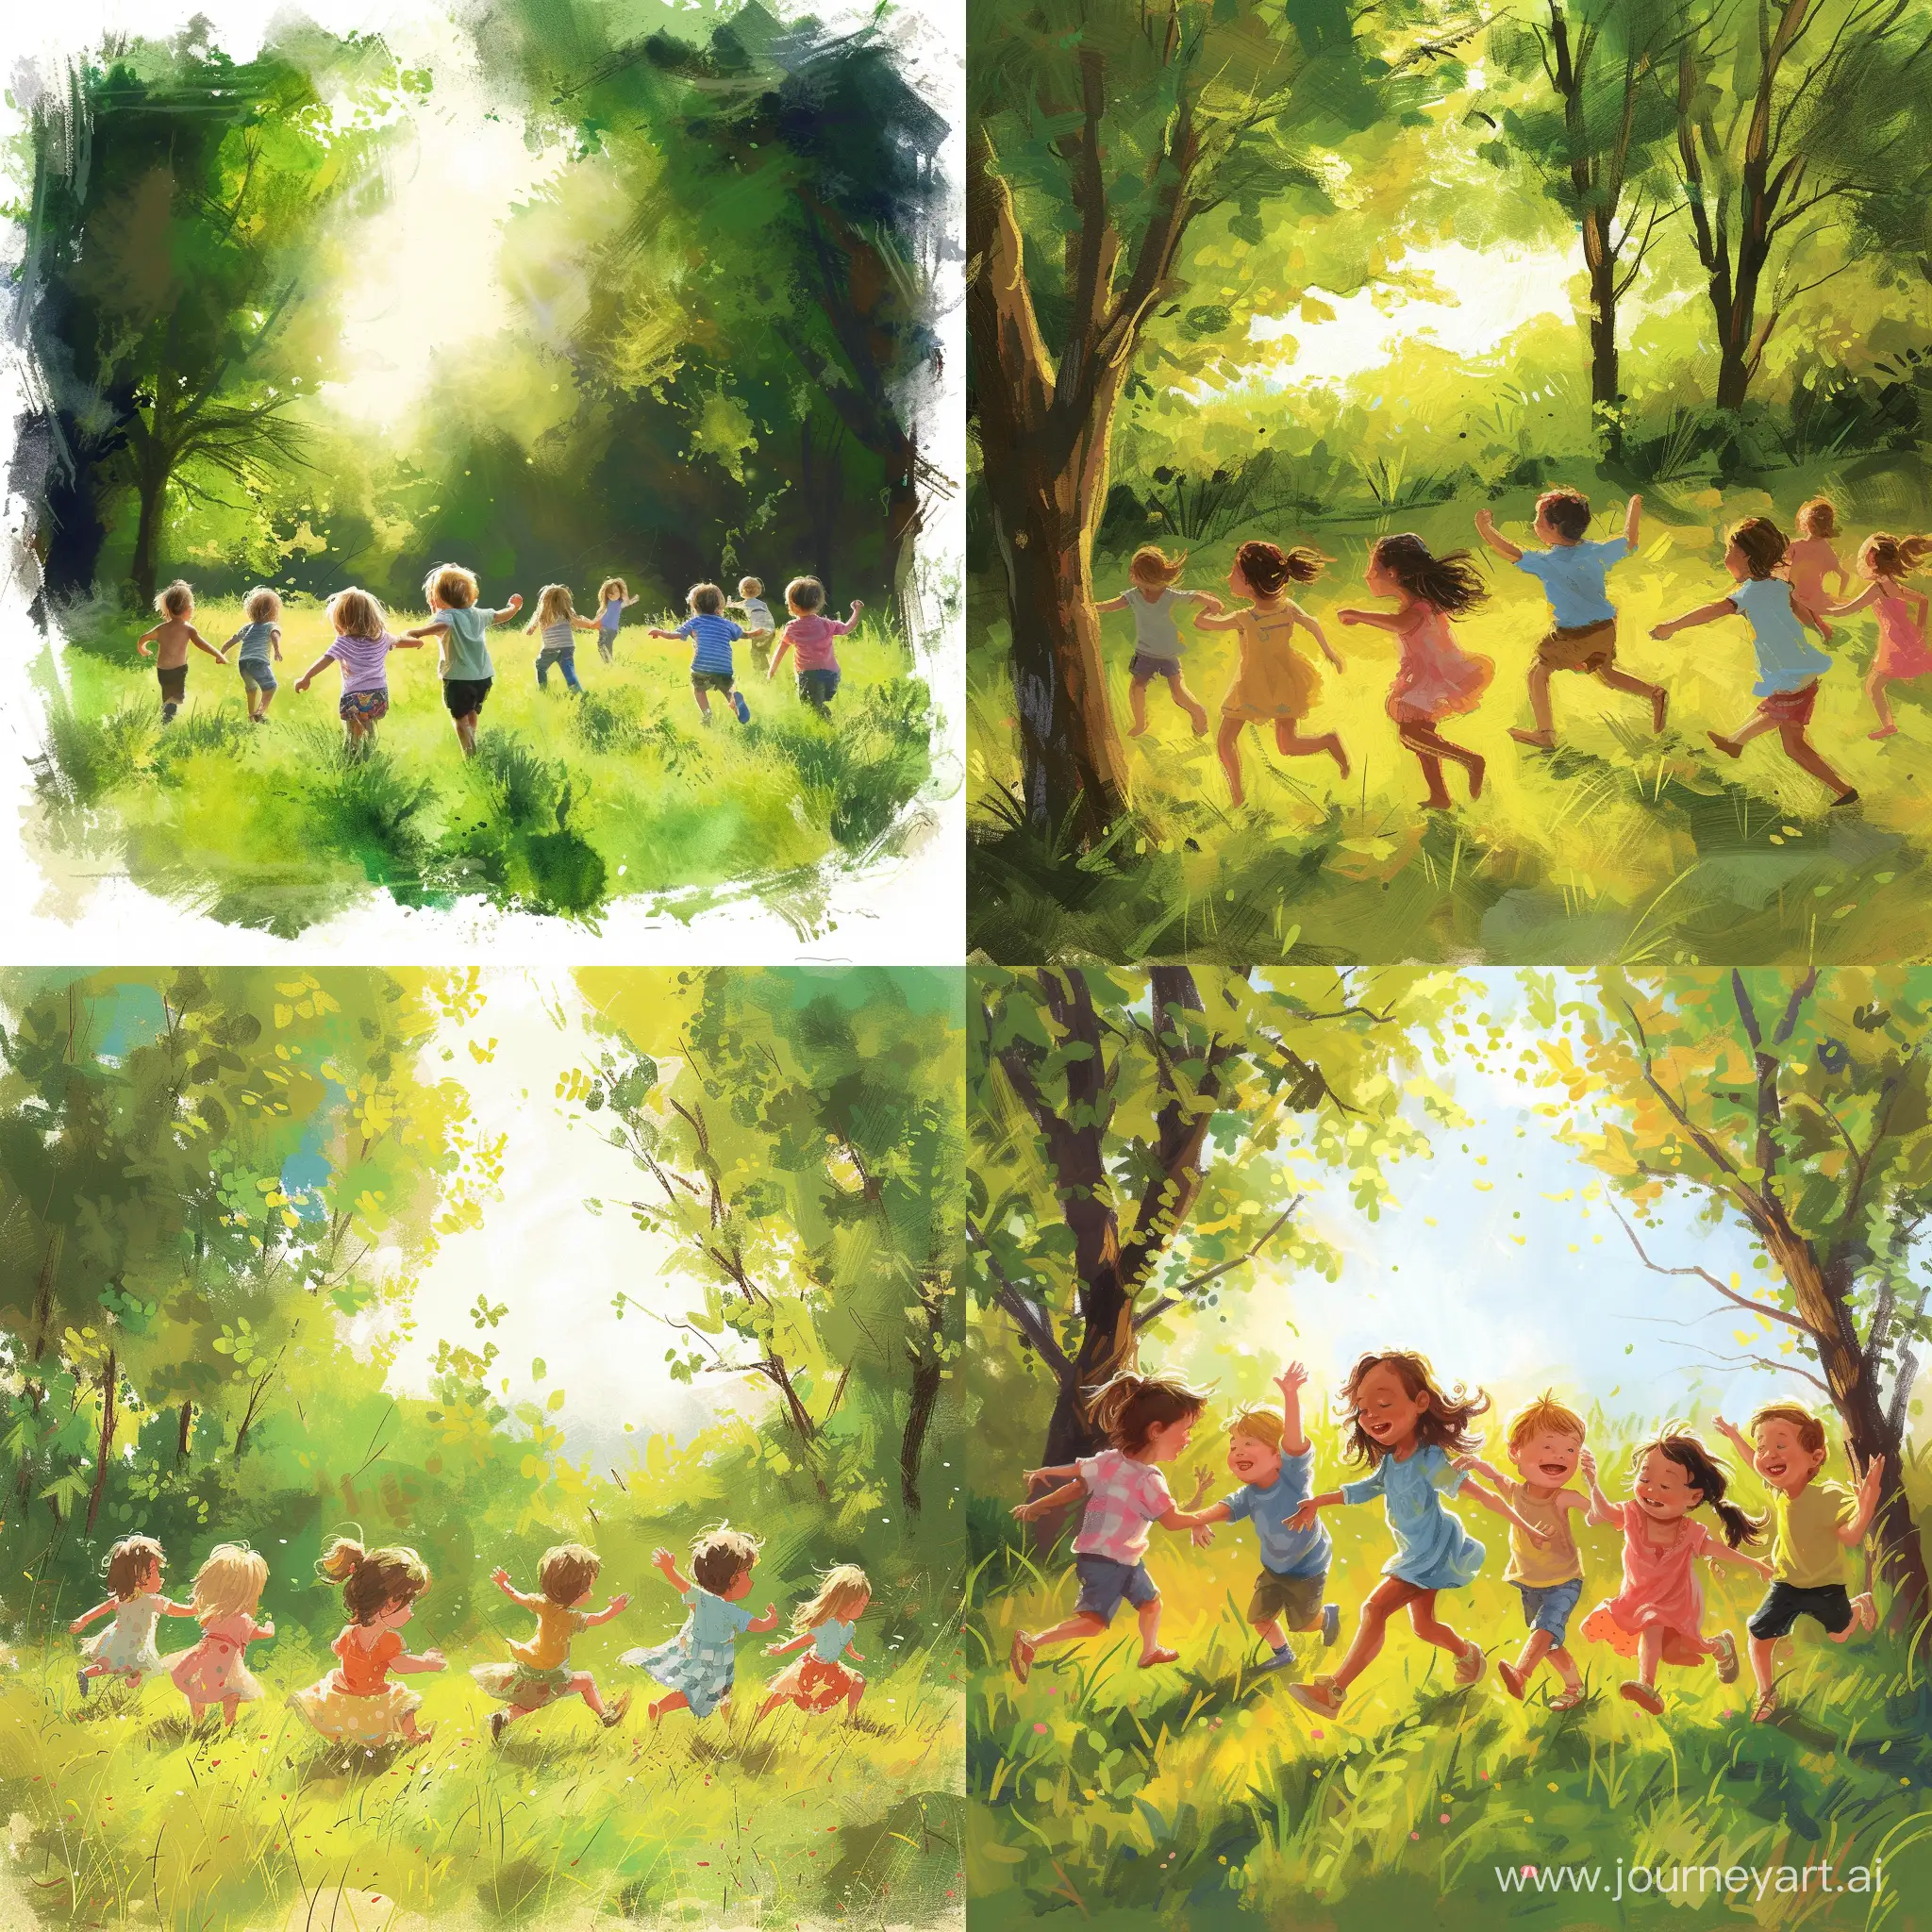 Joyful-Children-Playing-Outdoors-in-a-Sunny-Meadow